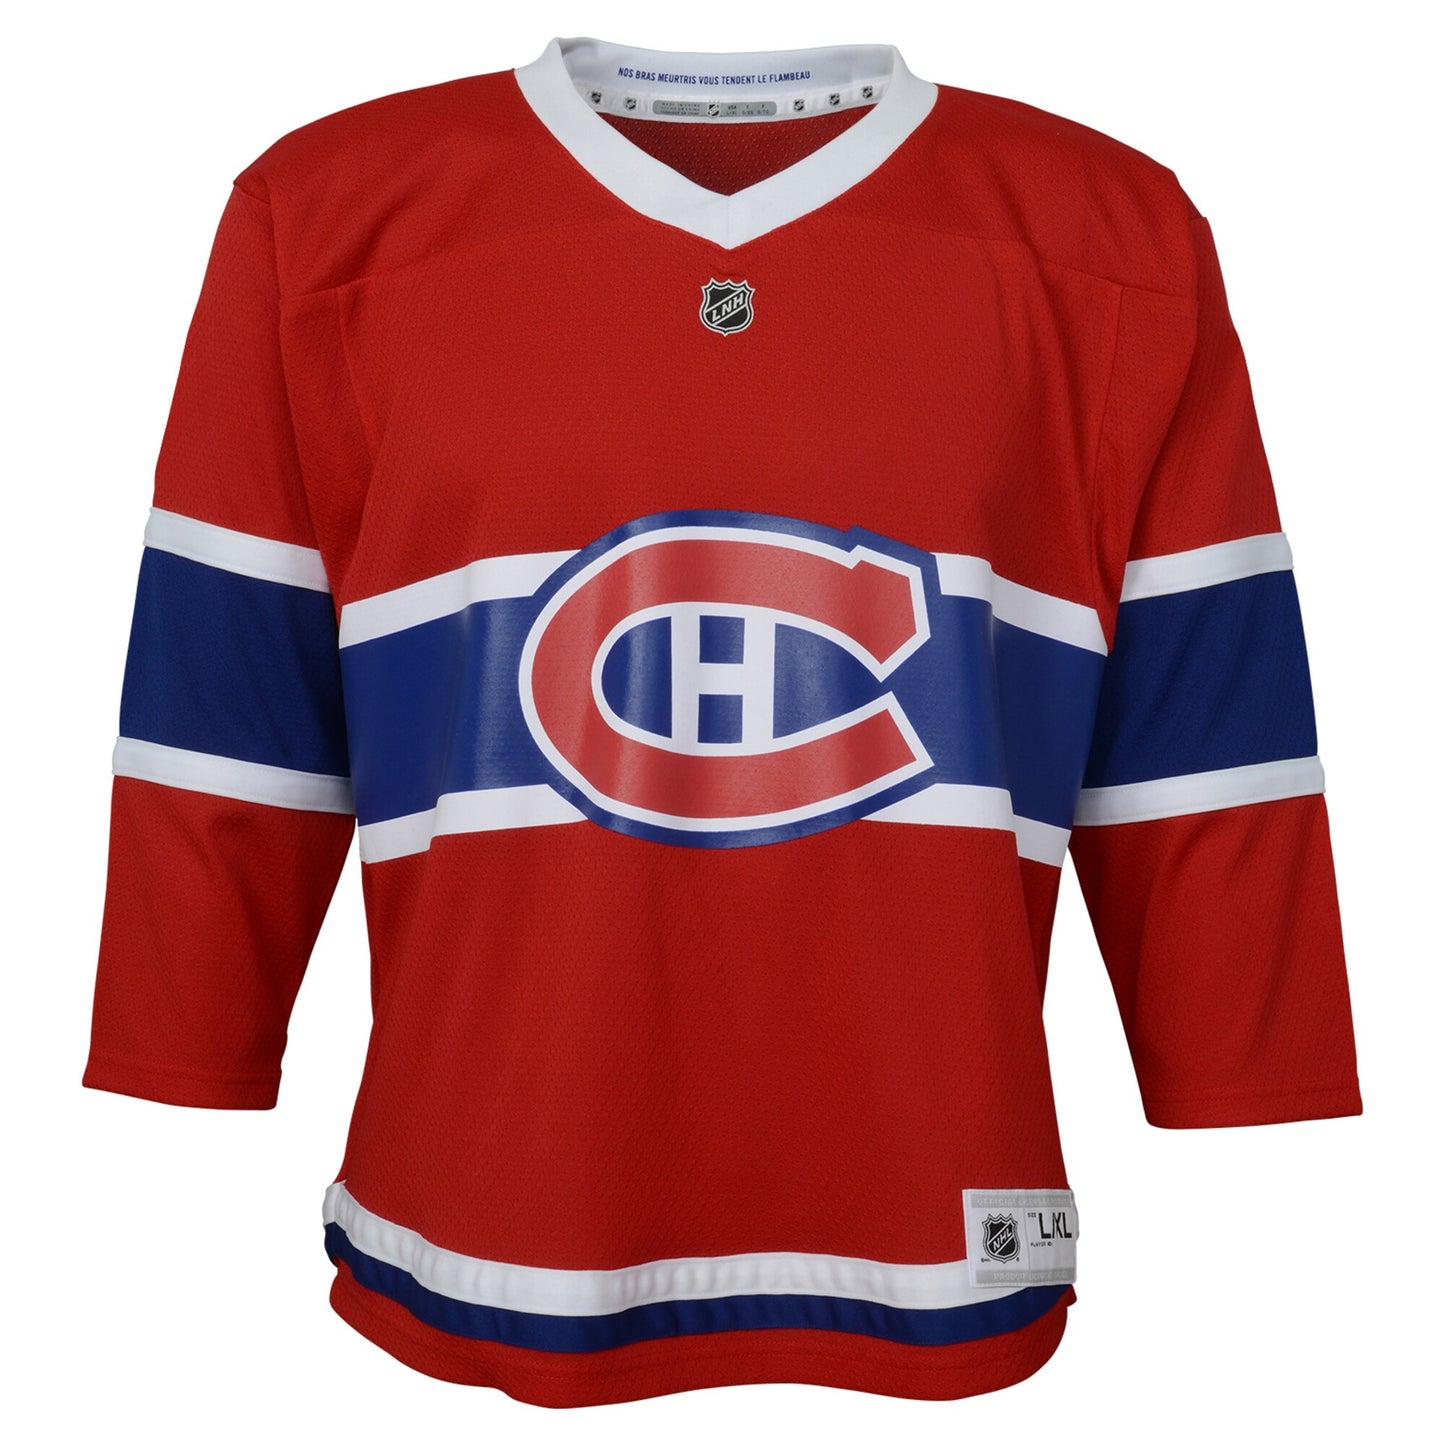 NHL Youth Replica Jersey Home Canadiens